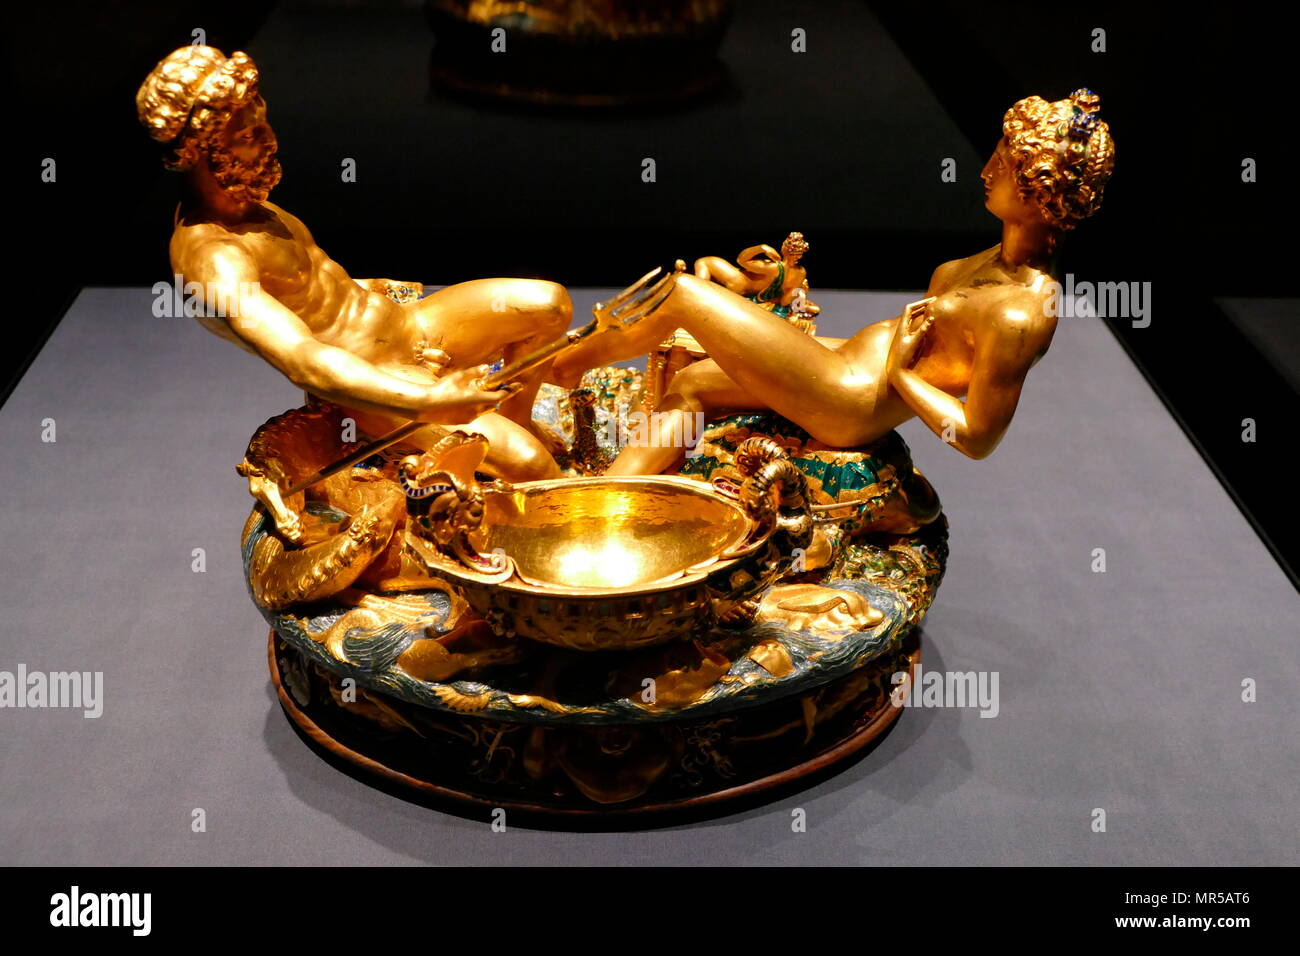 Photograph of the Cellini Salt Cellar (Saliera), a part-enamelled gold table sculpture, by Benvenuto Cellini. It was completed in 1543 for Francis I of France, from models that had been prepared many years earlier for Cardinal Ippolito d'Este. The Cellini Salt Cellar depicts a male figure representing the sea and a female figure that represents the earth. Benvenuto Cellini (1500-1571) an Italian goldsmith, sculptor, draftsman, solider, musician, and artist. Dated 16th Century Stock Photo